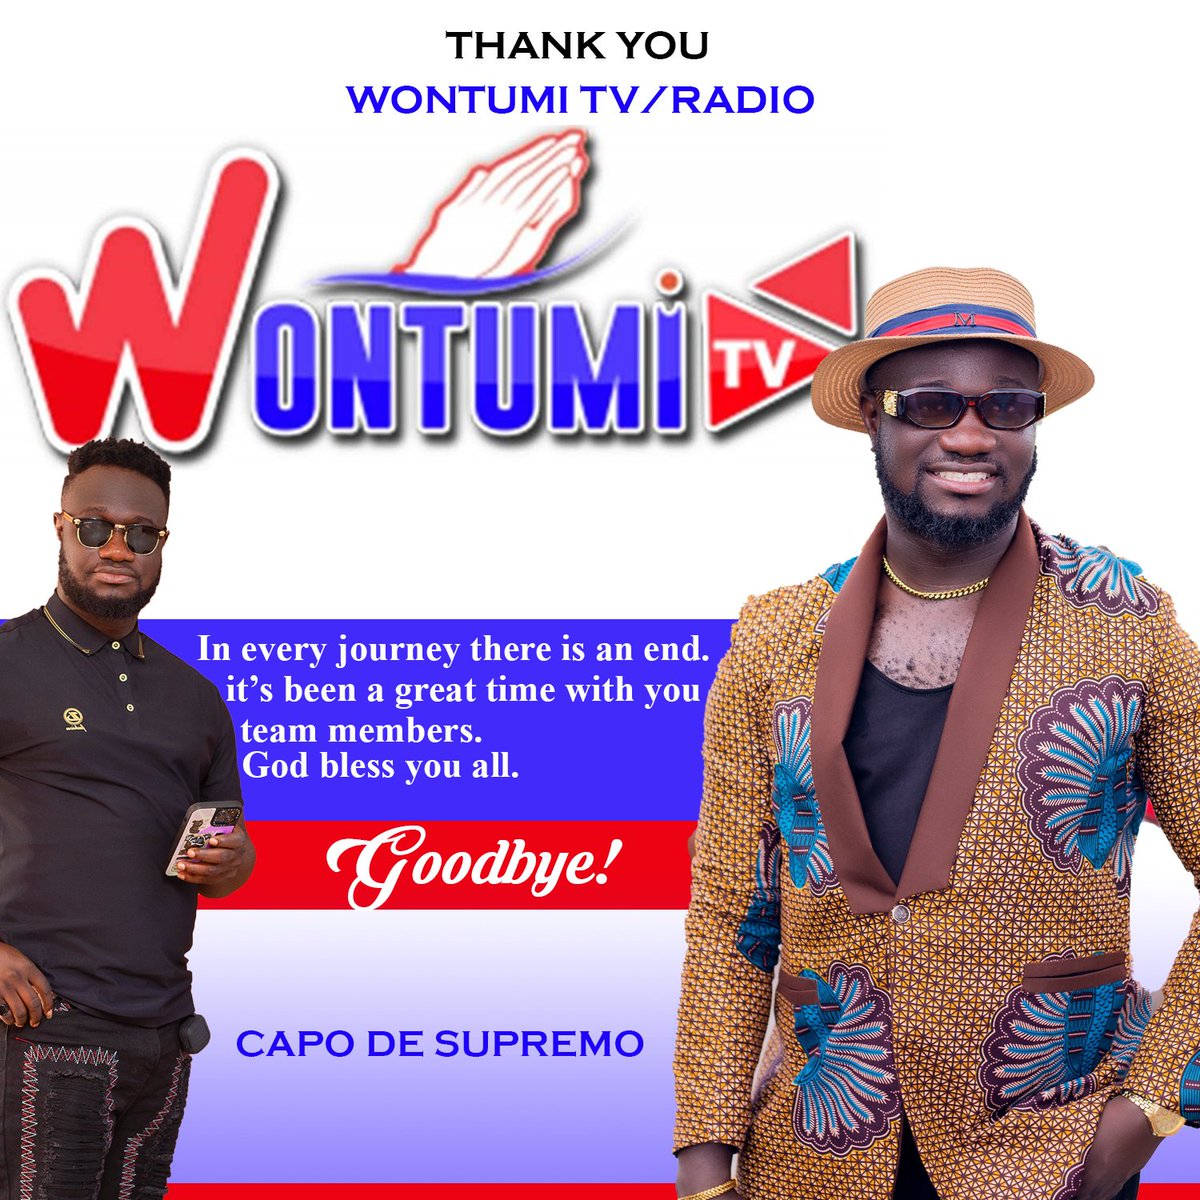 In Every Journey there is an end . 
Officially end my stay at wontumi tv /Radio.  Thanks to the management, the team led by my Boss (King Eben ) king ,king, king)Thanks for the opportunity.   To the fans will announce my next destination soon. Love you all❤ #shiiiishiiikummooo🔥